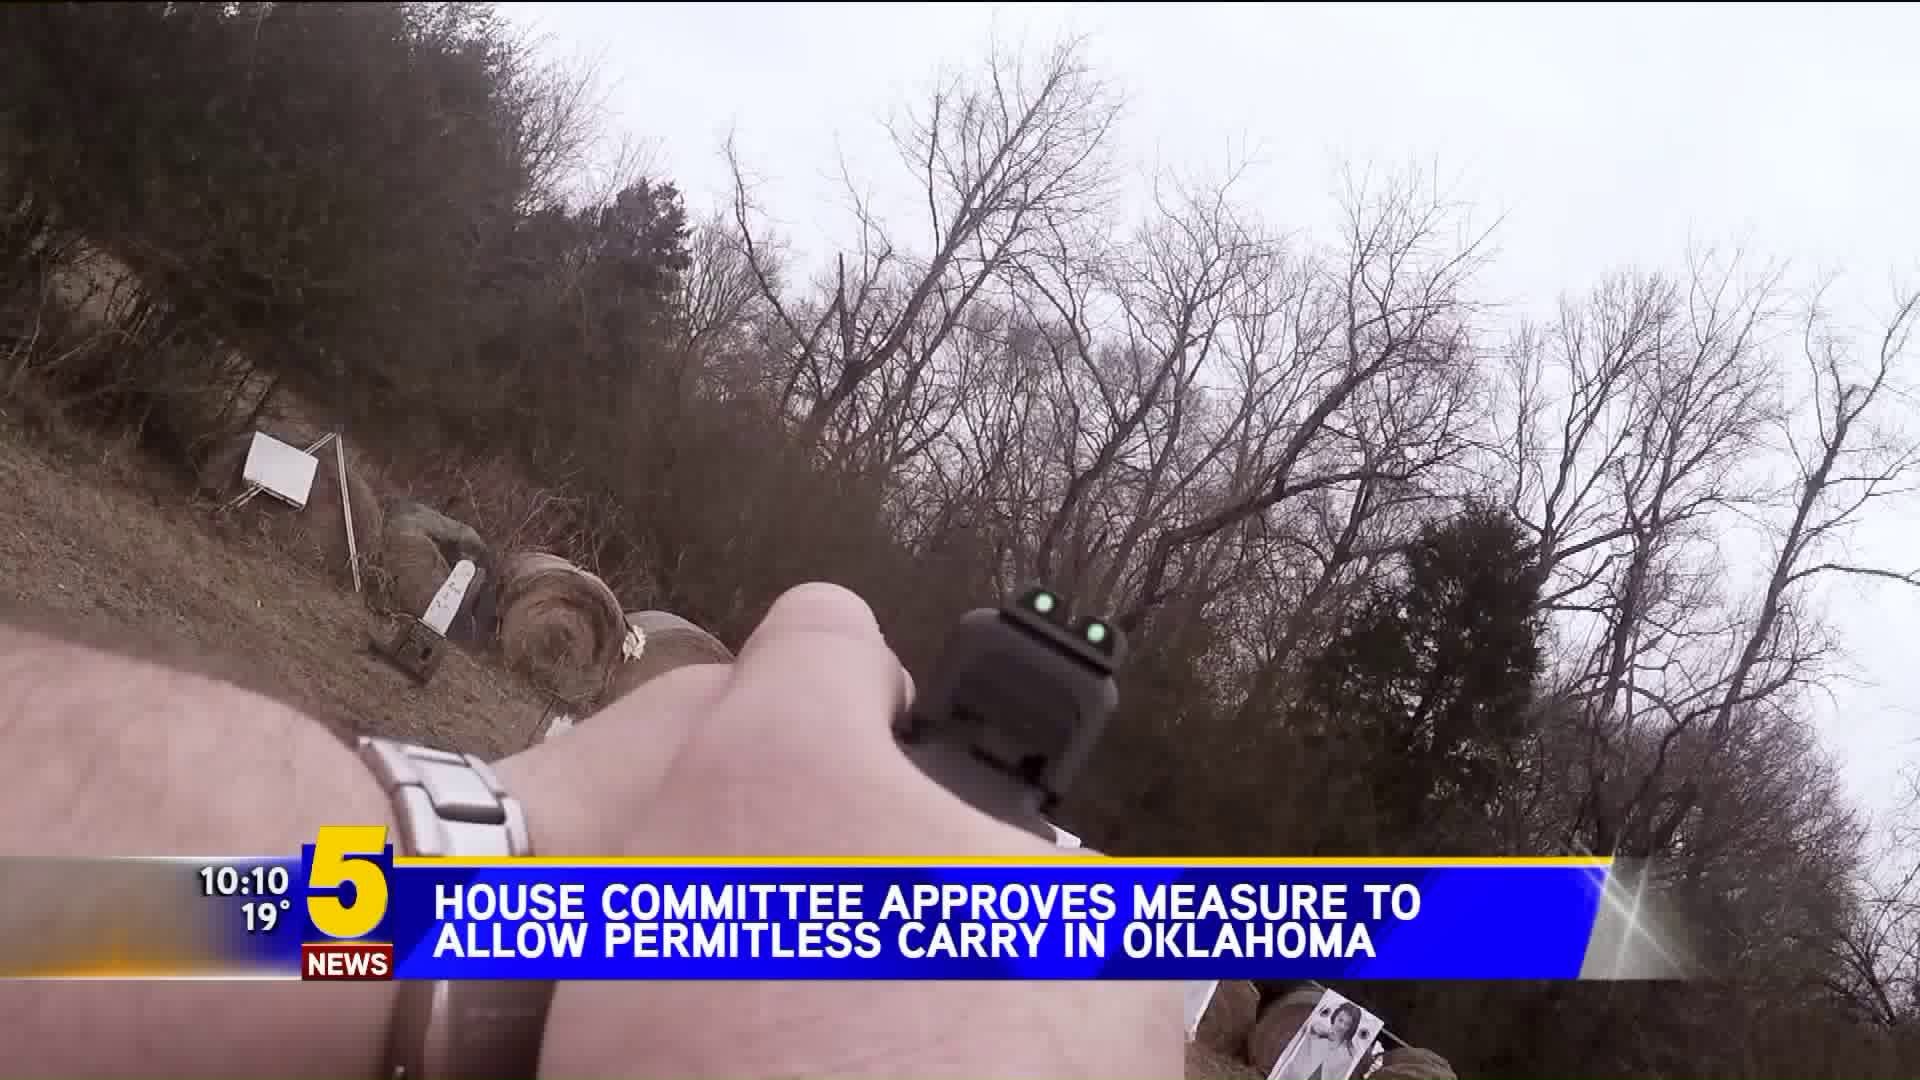 House Committee Approves Measure To Allow Permitless Carry In Oklahoma